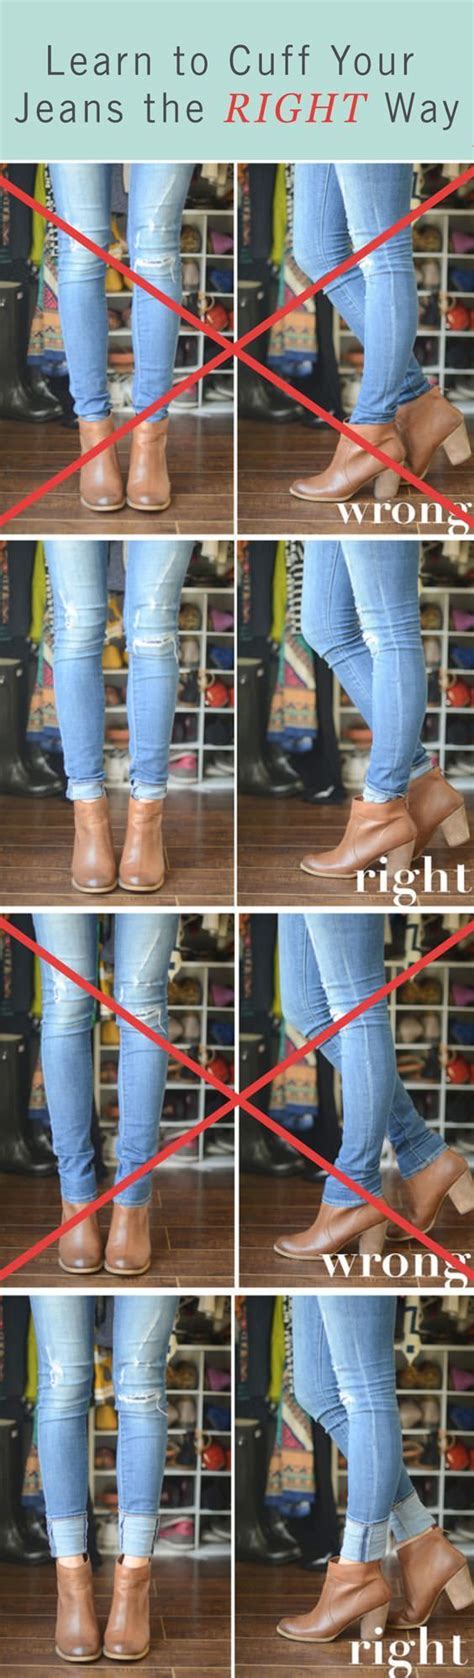 Learn To Cuff Your Jeans Properly To Make Ankle Boots The Most